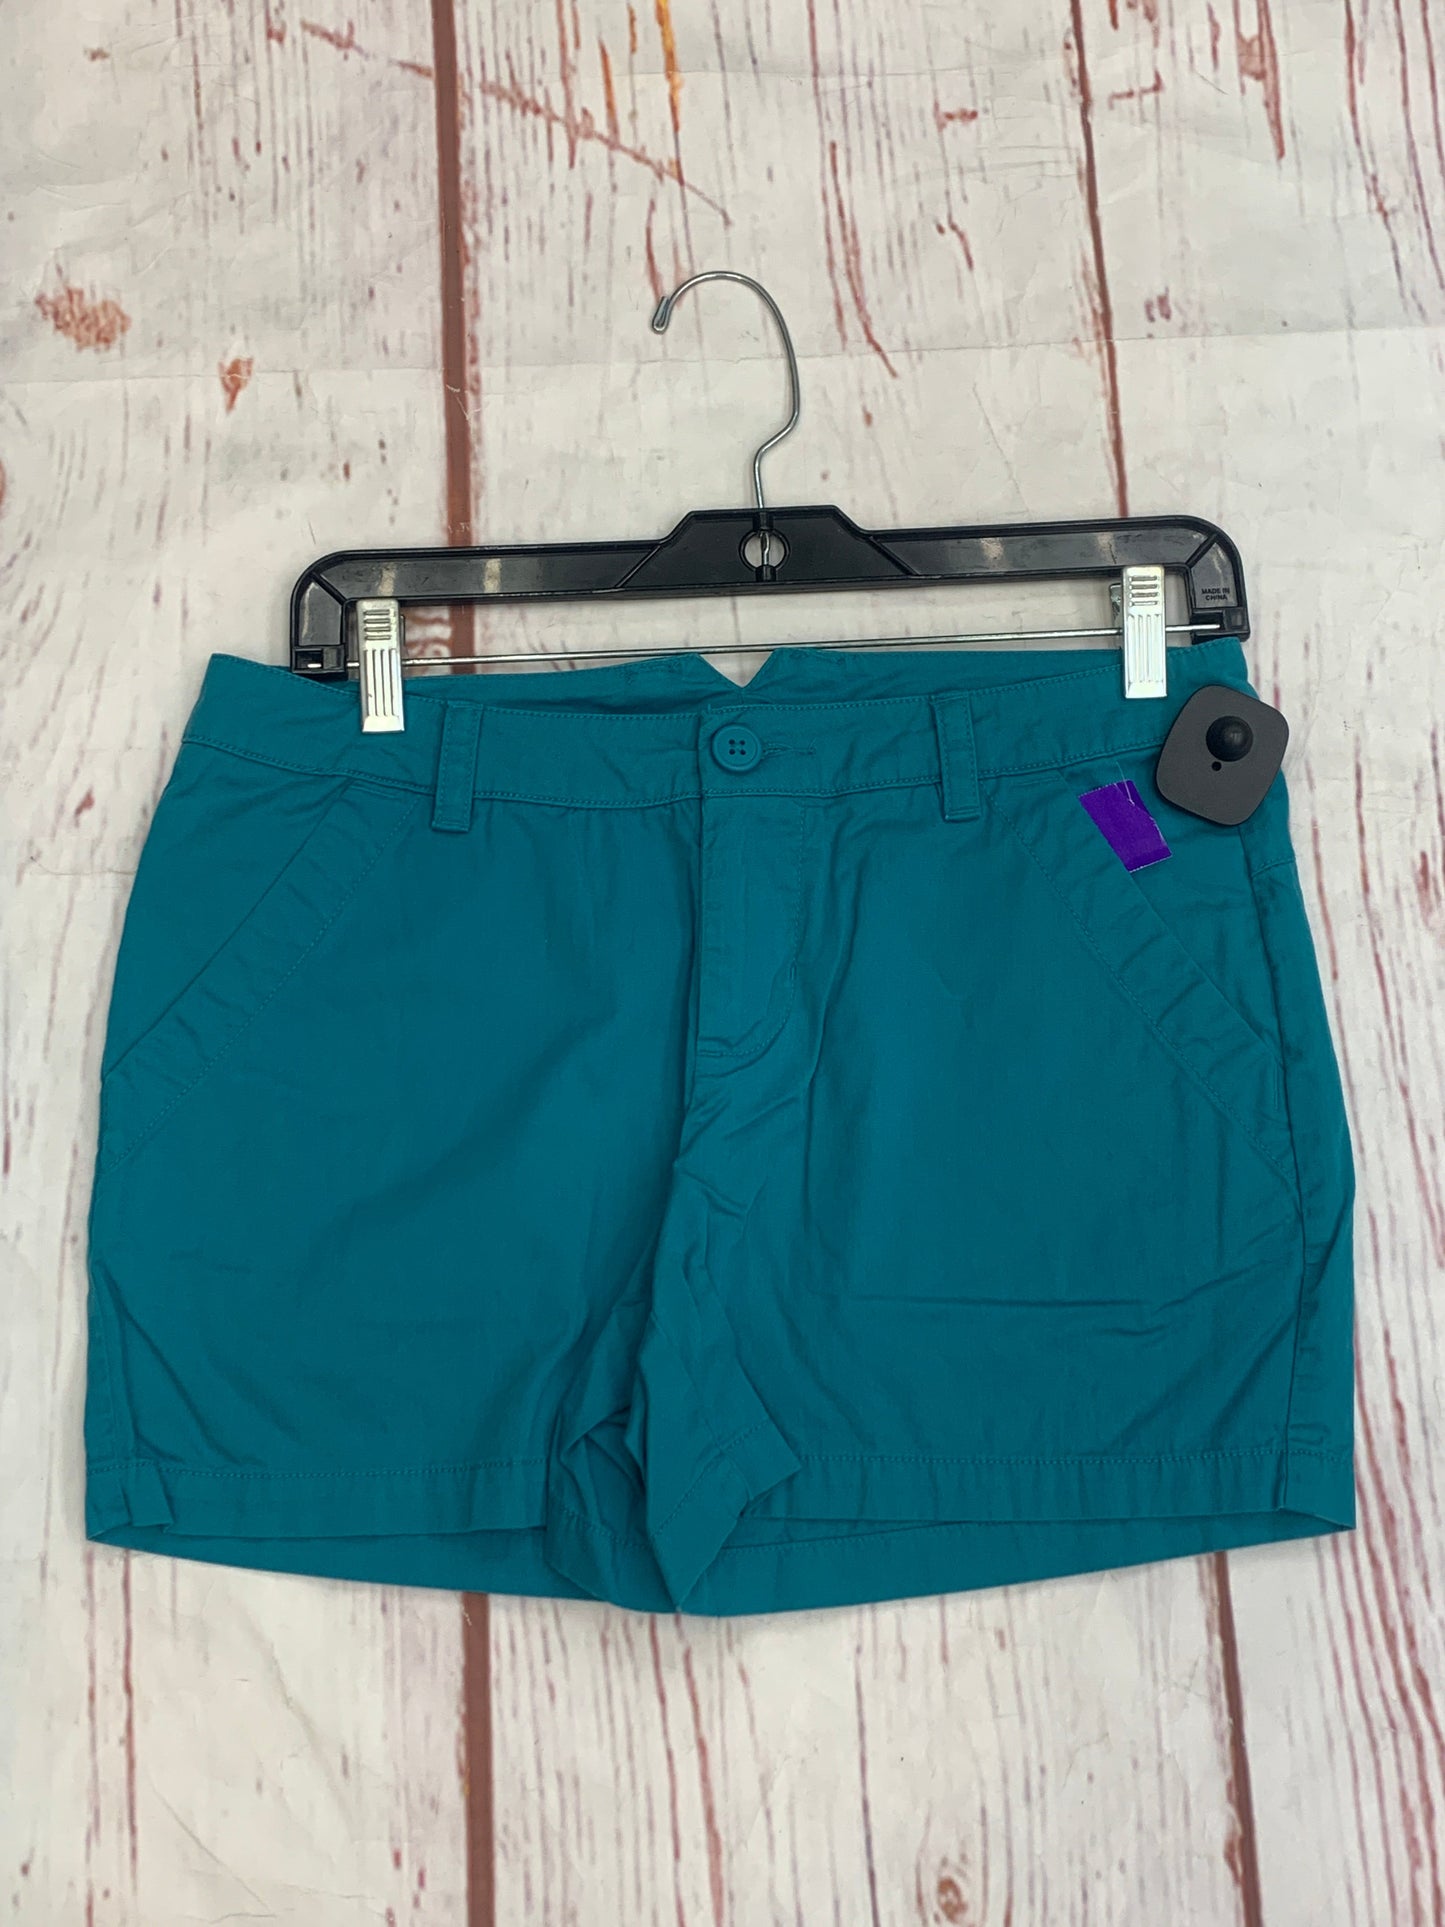 Teal Shorts Columbia, Size 6